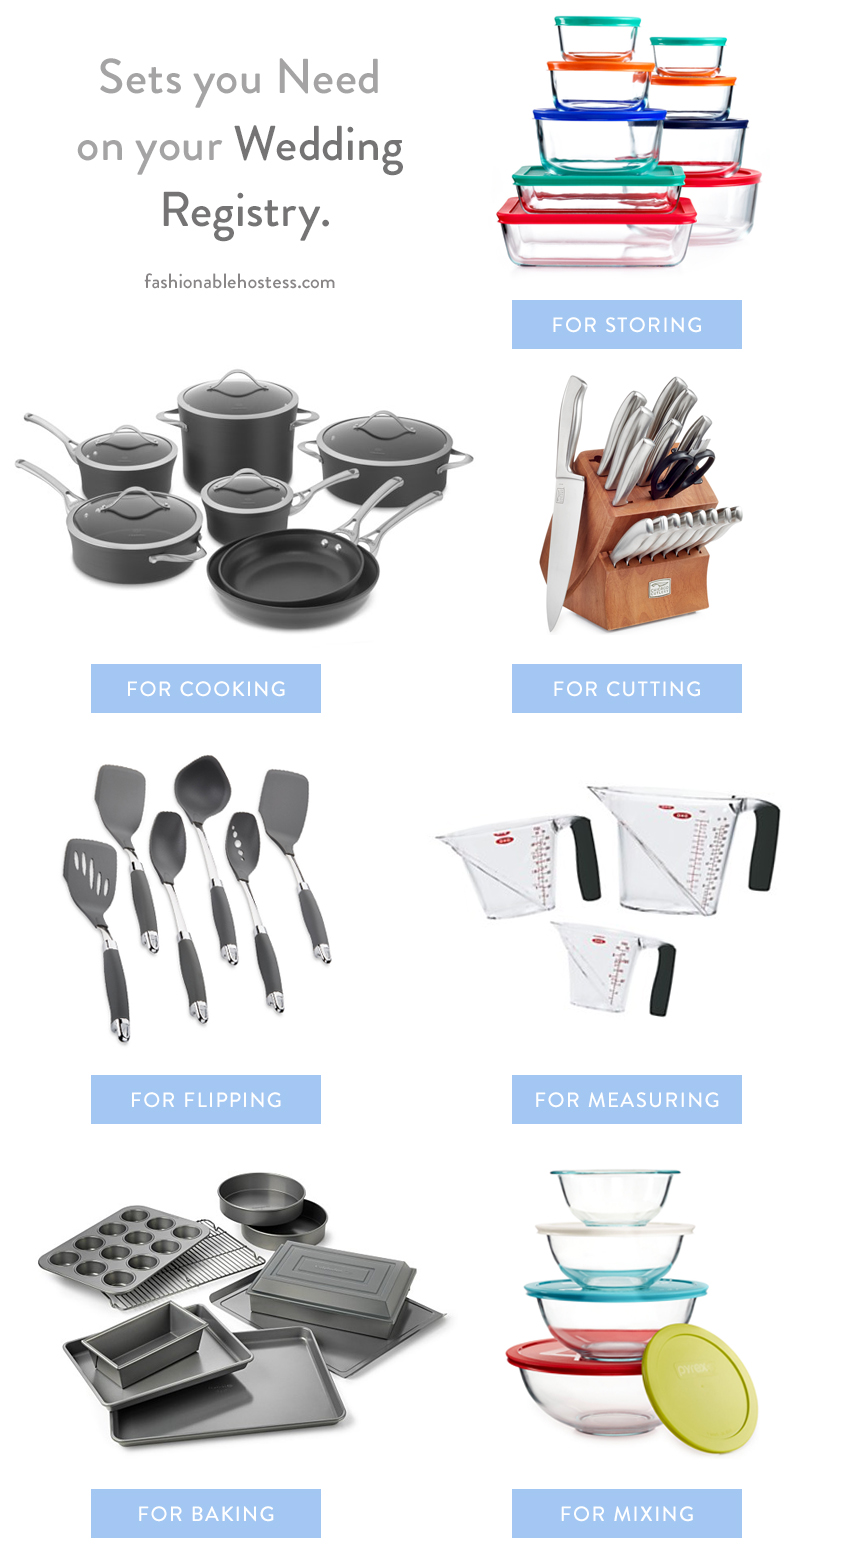 Sets you need on your wedding registry